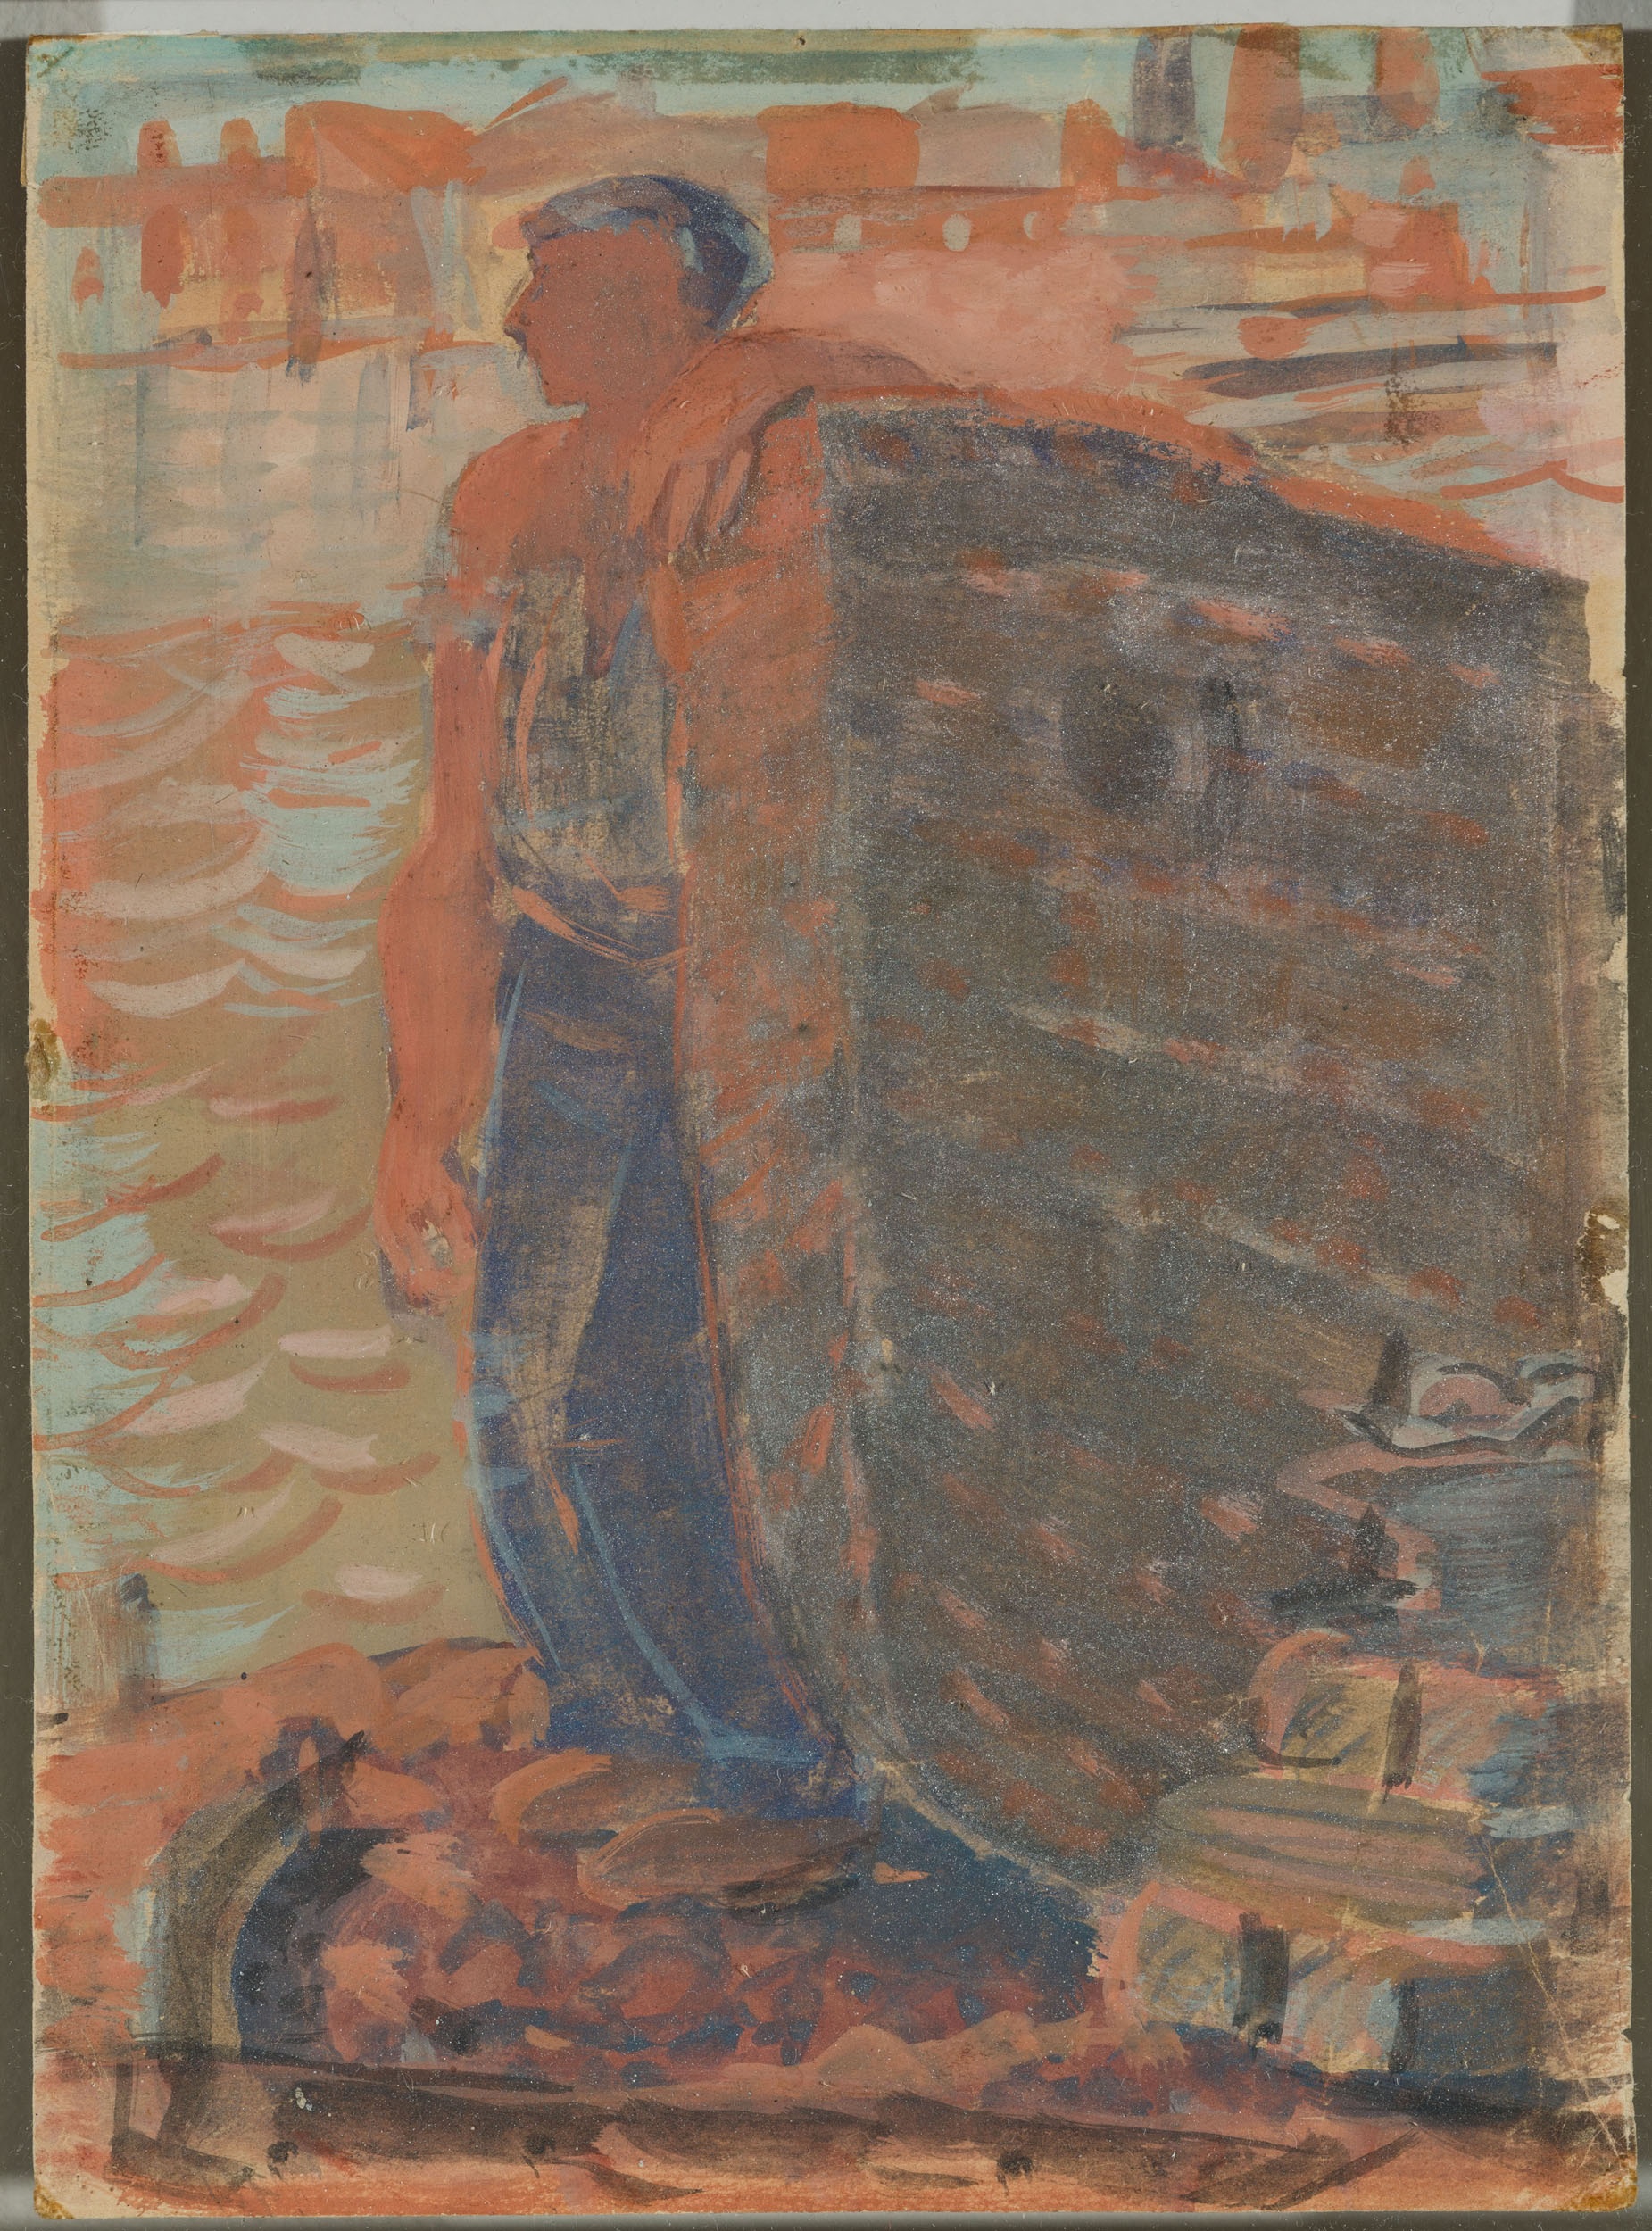 study for The Dockworker (The Salgo Trust for Education CC BY-NC-SA)